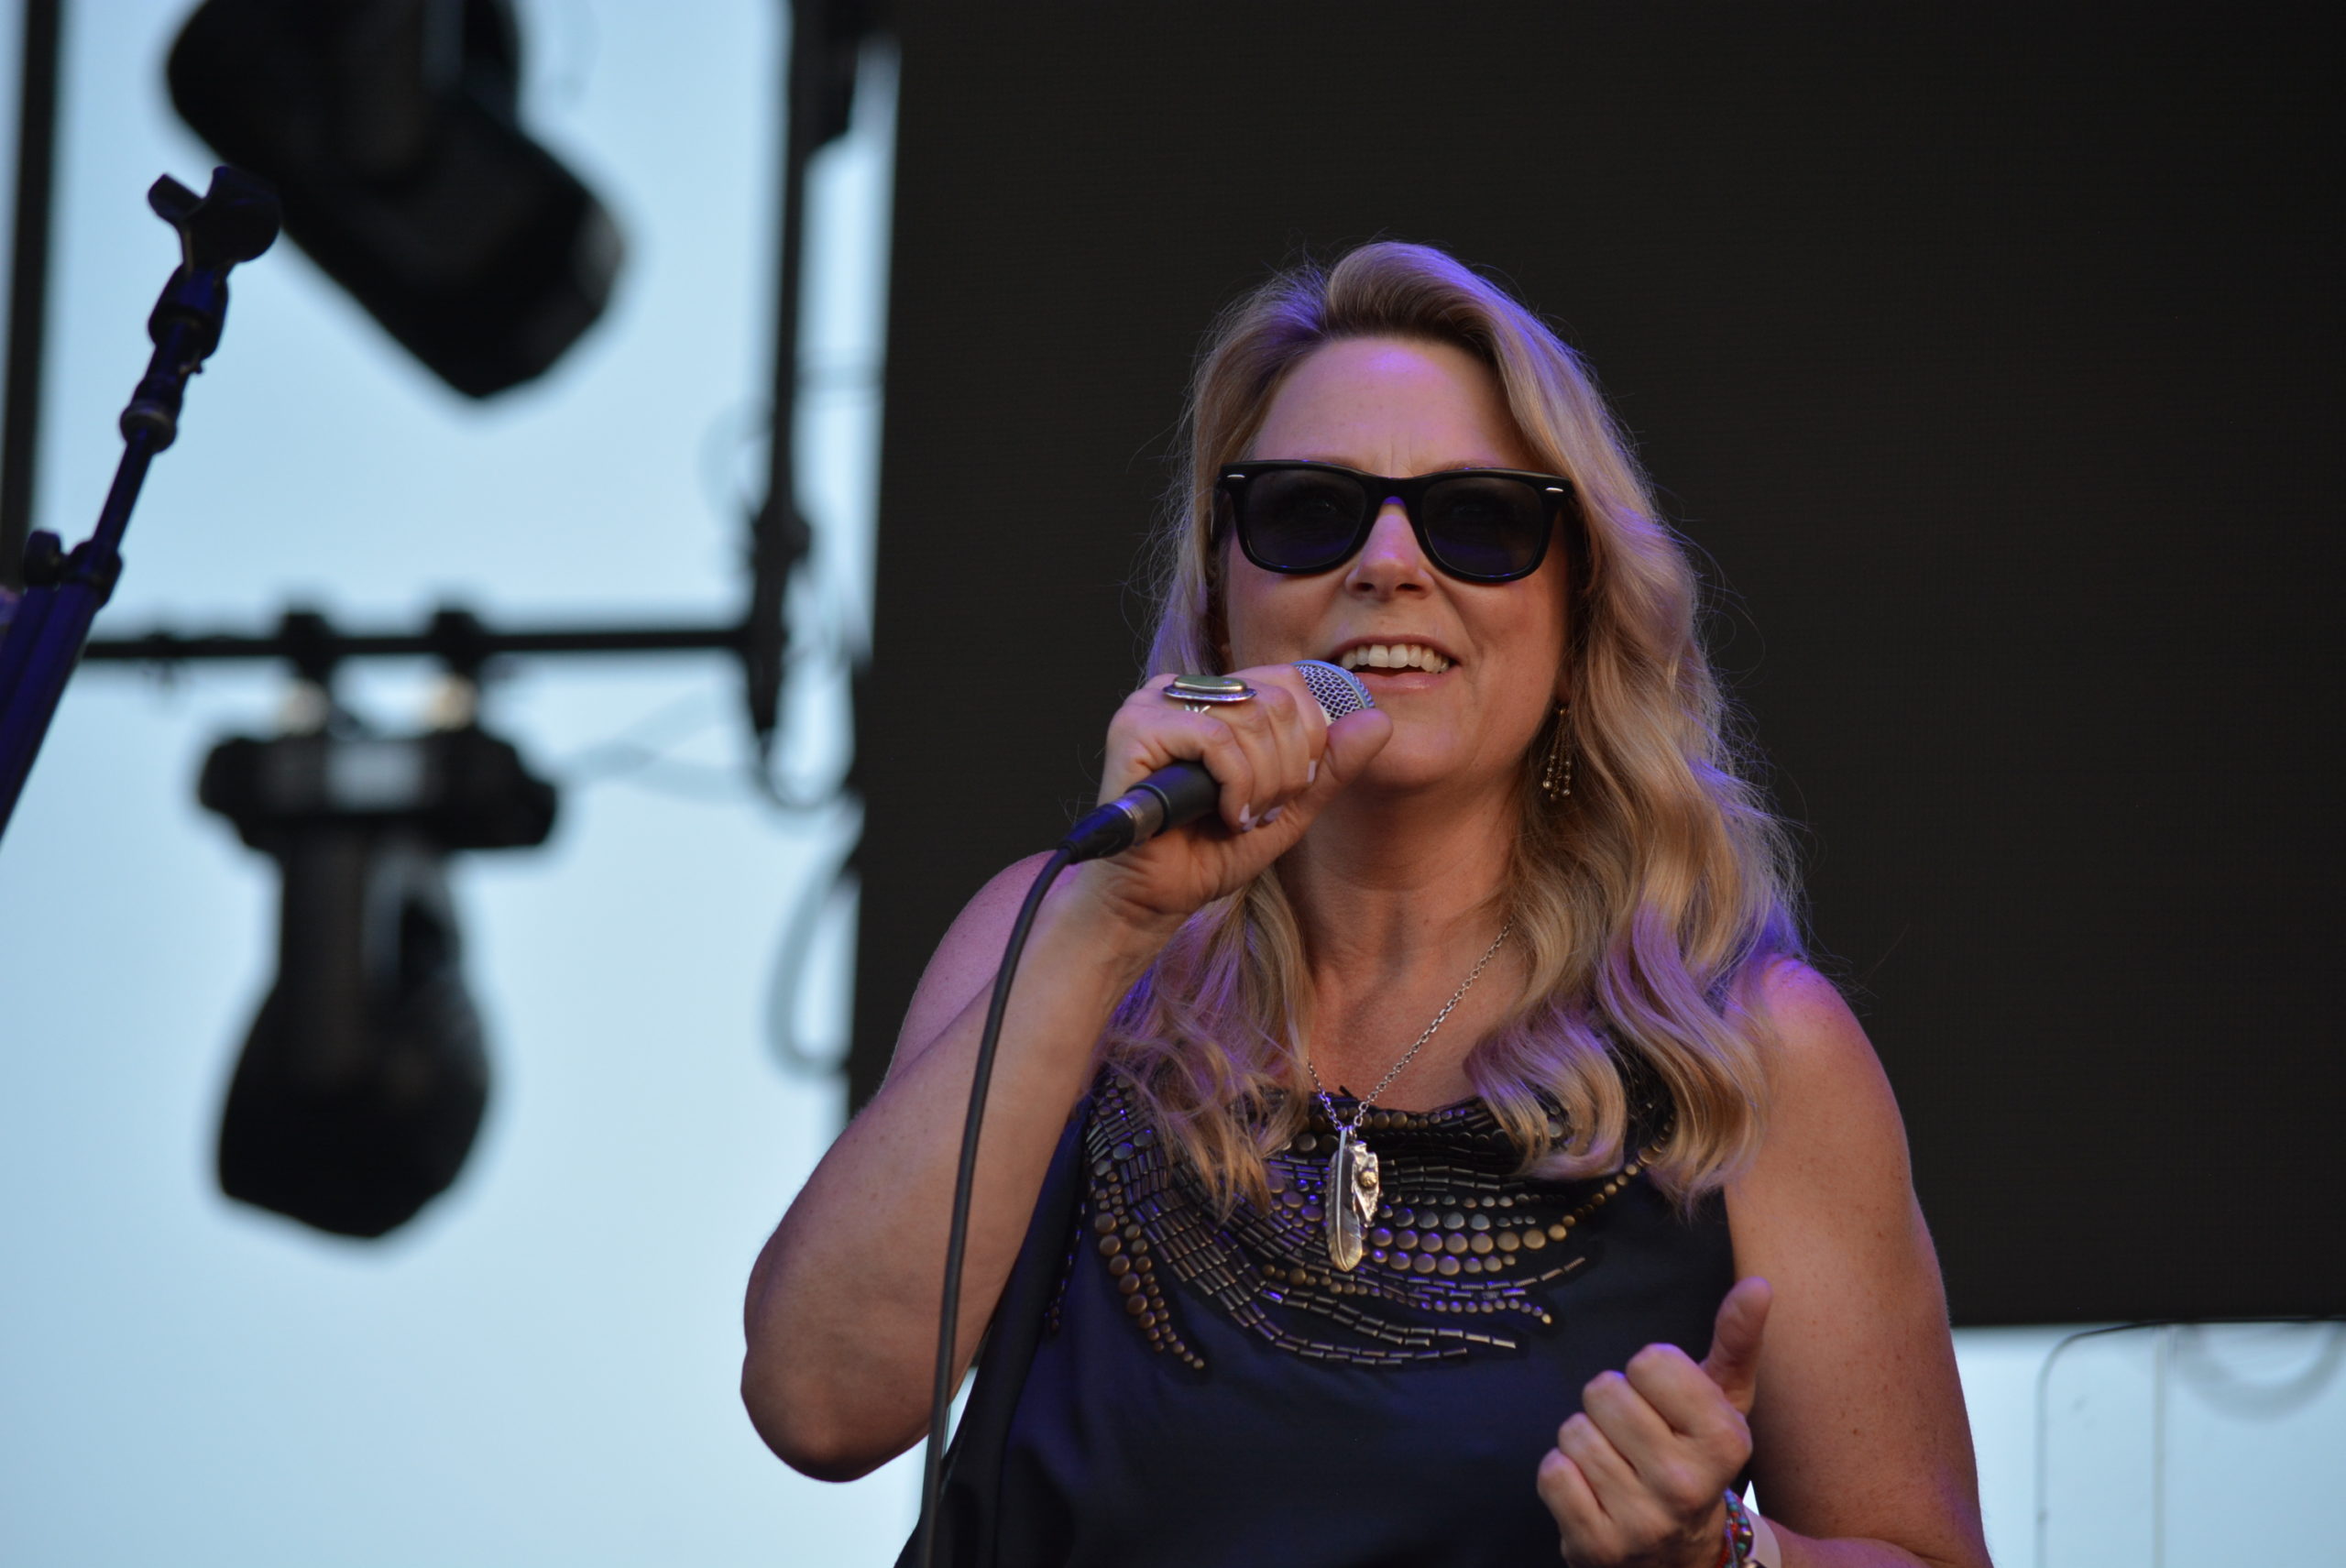 Susan Tedeschi on Community, Creativity and Charging into Johnny Cash